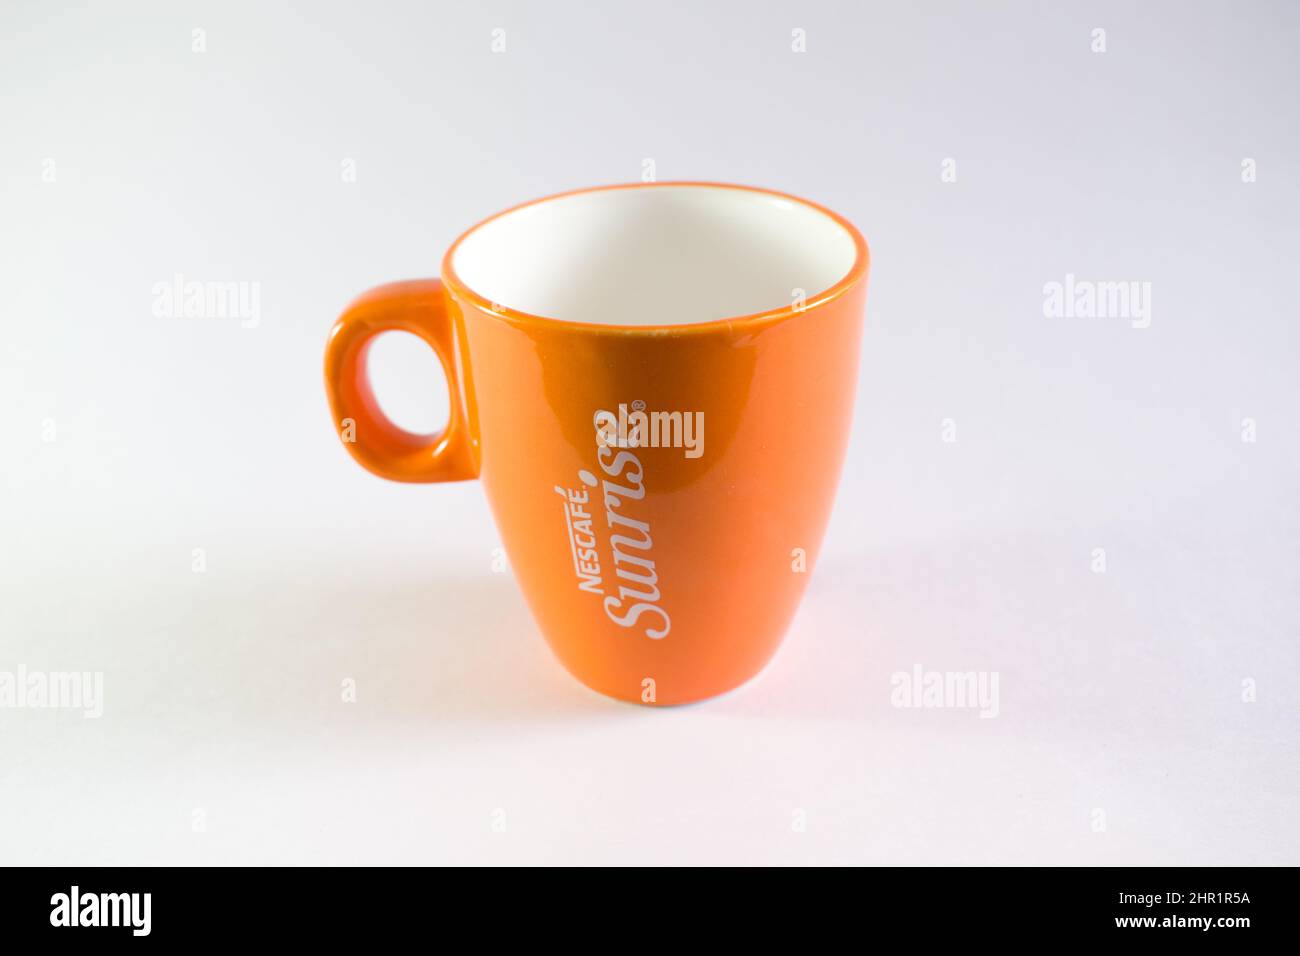 https://c8.alamy.com/comp/2HR1R5A/a-picture-of-an-orange-cup-of-nescafe-sunrise-in-white-background-2HR1R5A.jpg